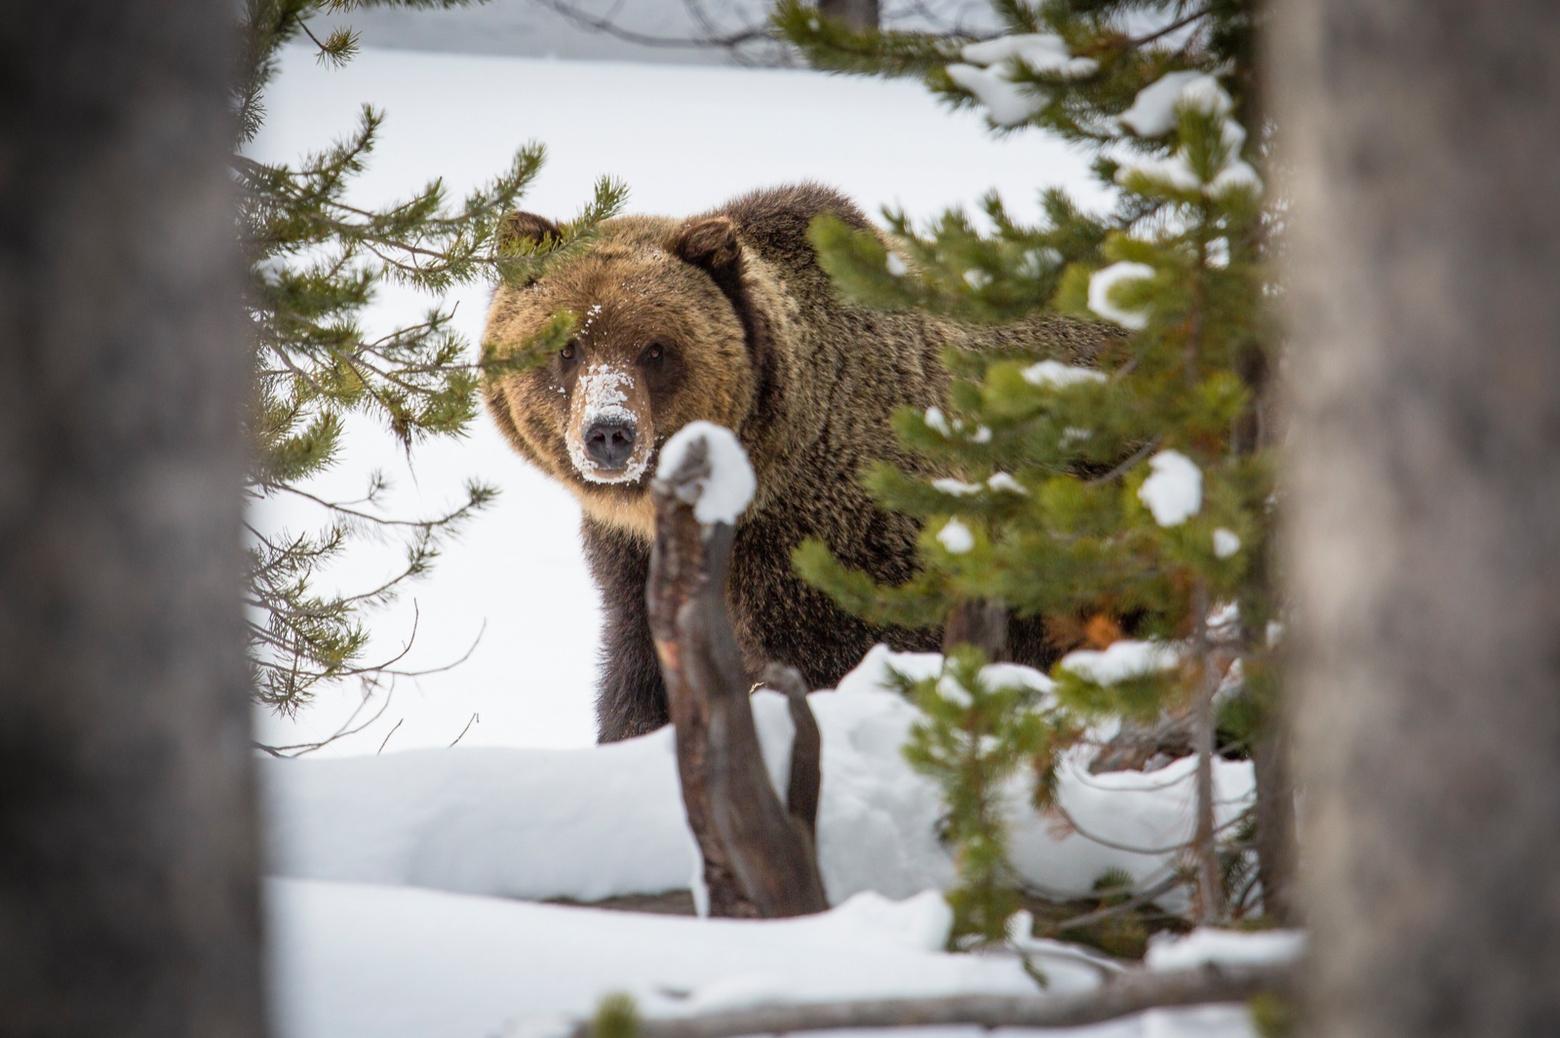 A grizzly searching for sustenance near Canyon in Yellowstone. Photo courtesy Neal Herbert/NPS